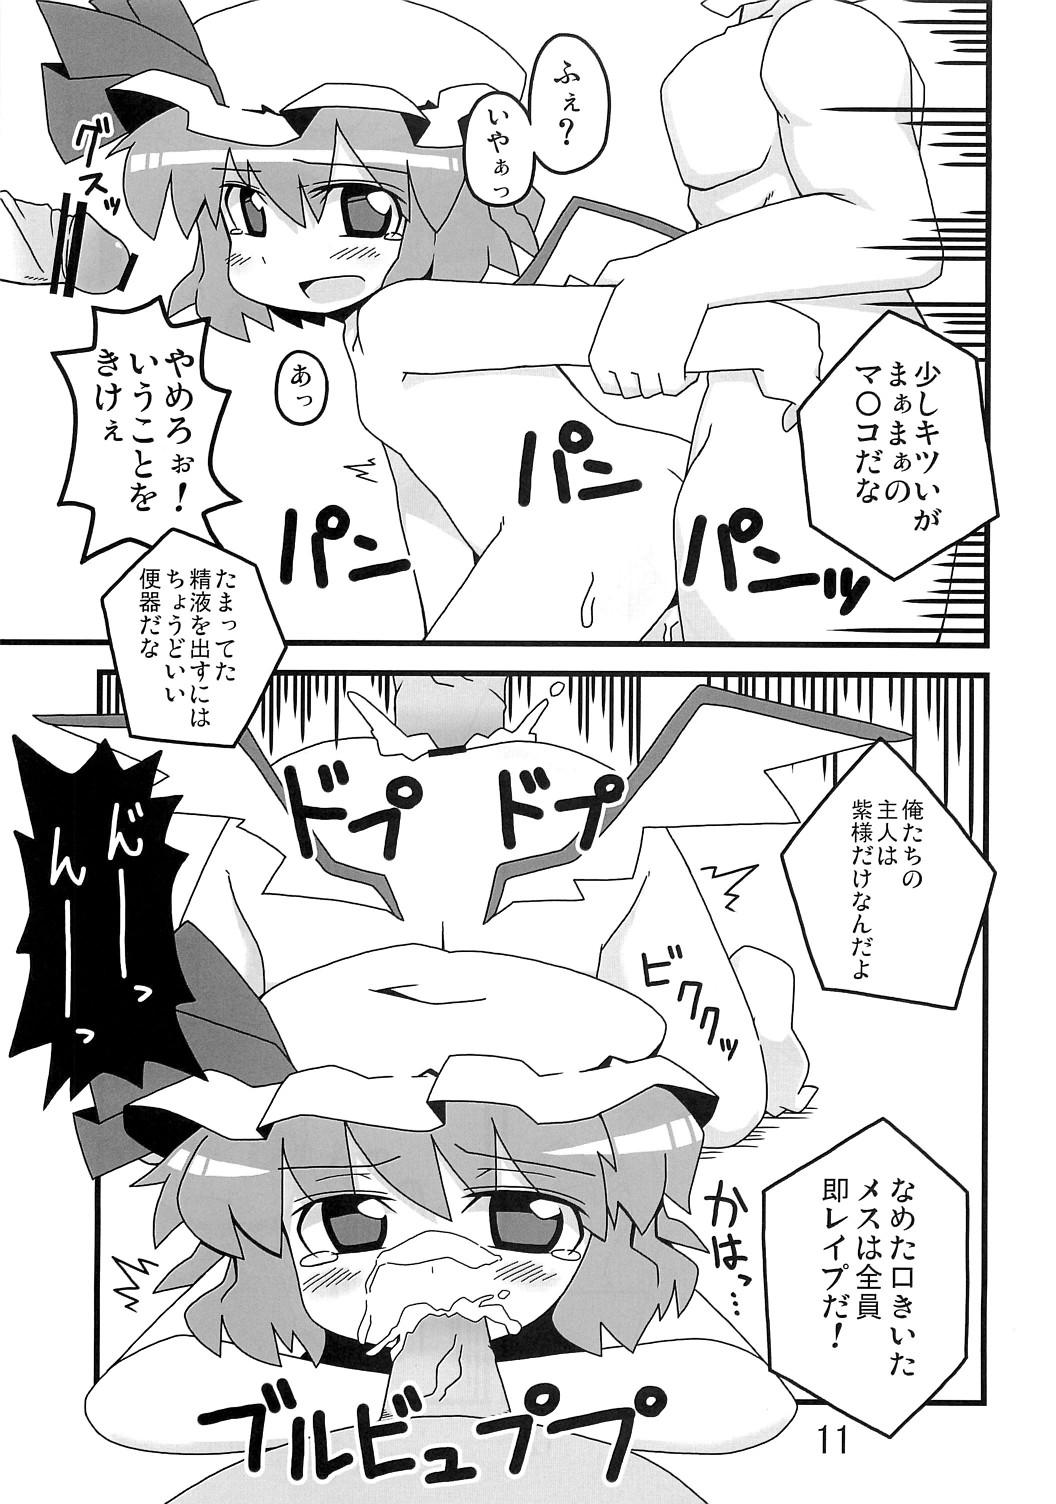 Tan 東方豊年祭 - Touhou project Amateurporn - Page 10